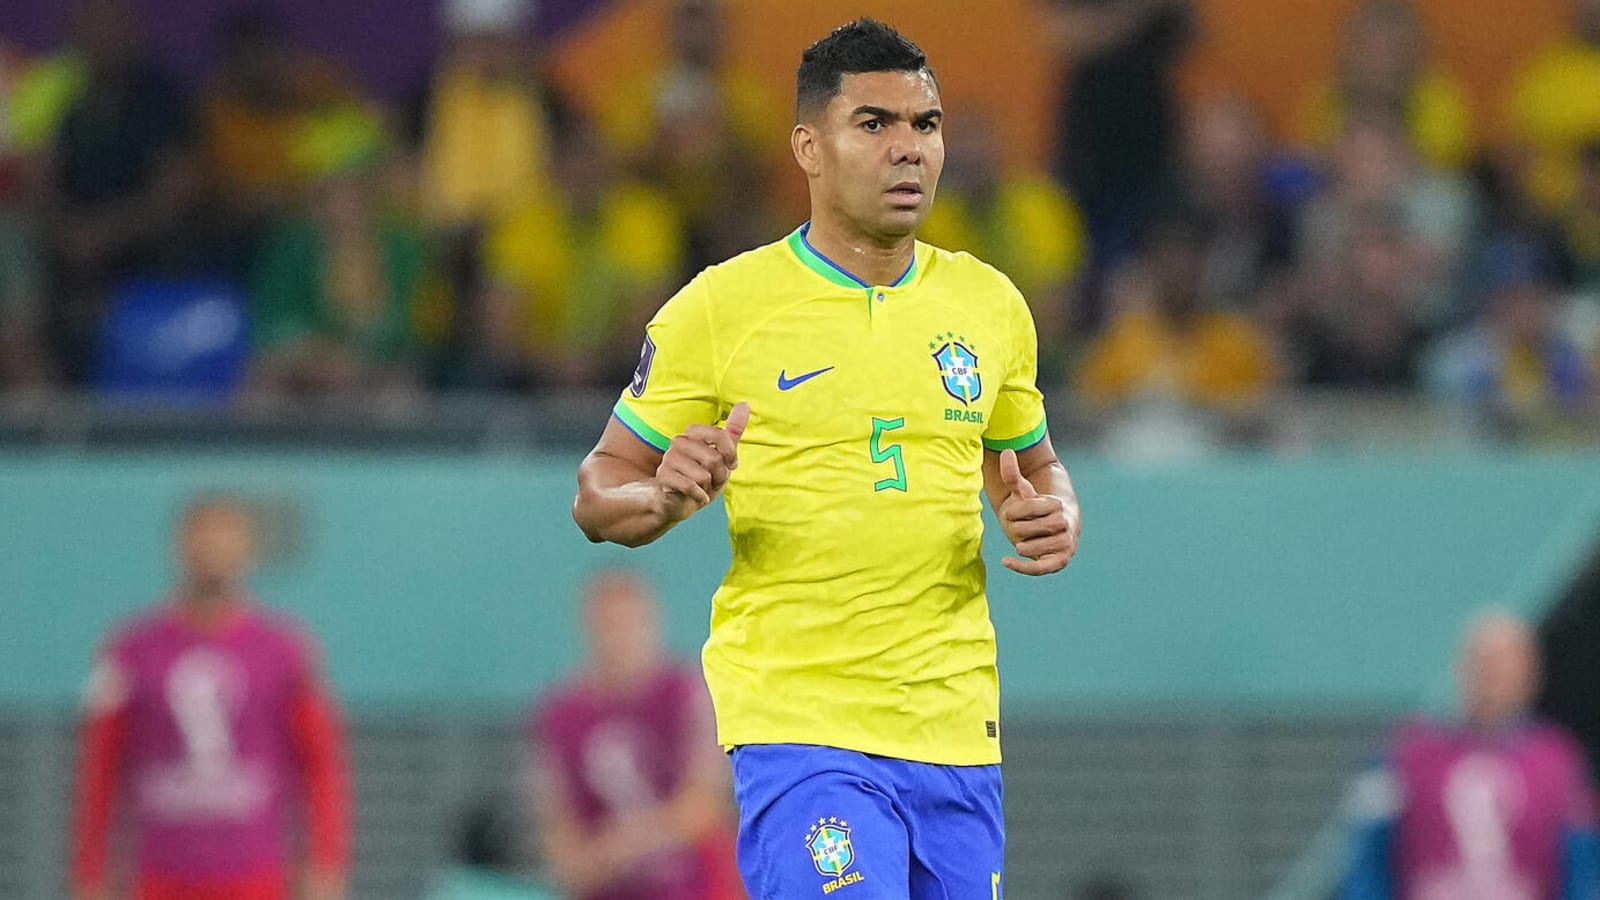 Casemiro injury throws up further concerns for Manchester United’s medical department